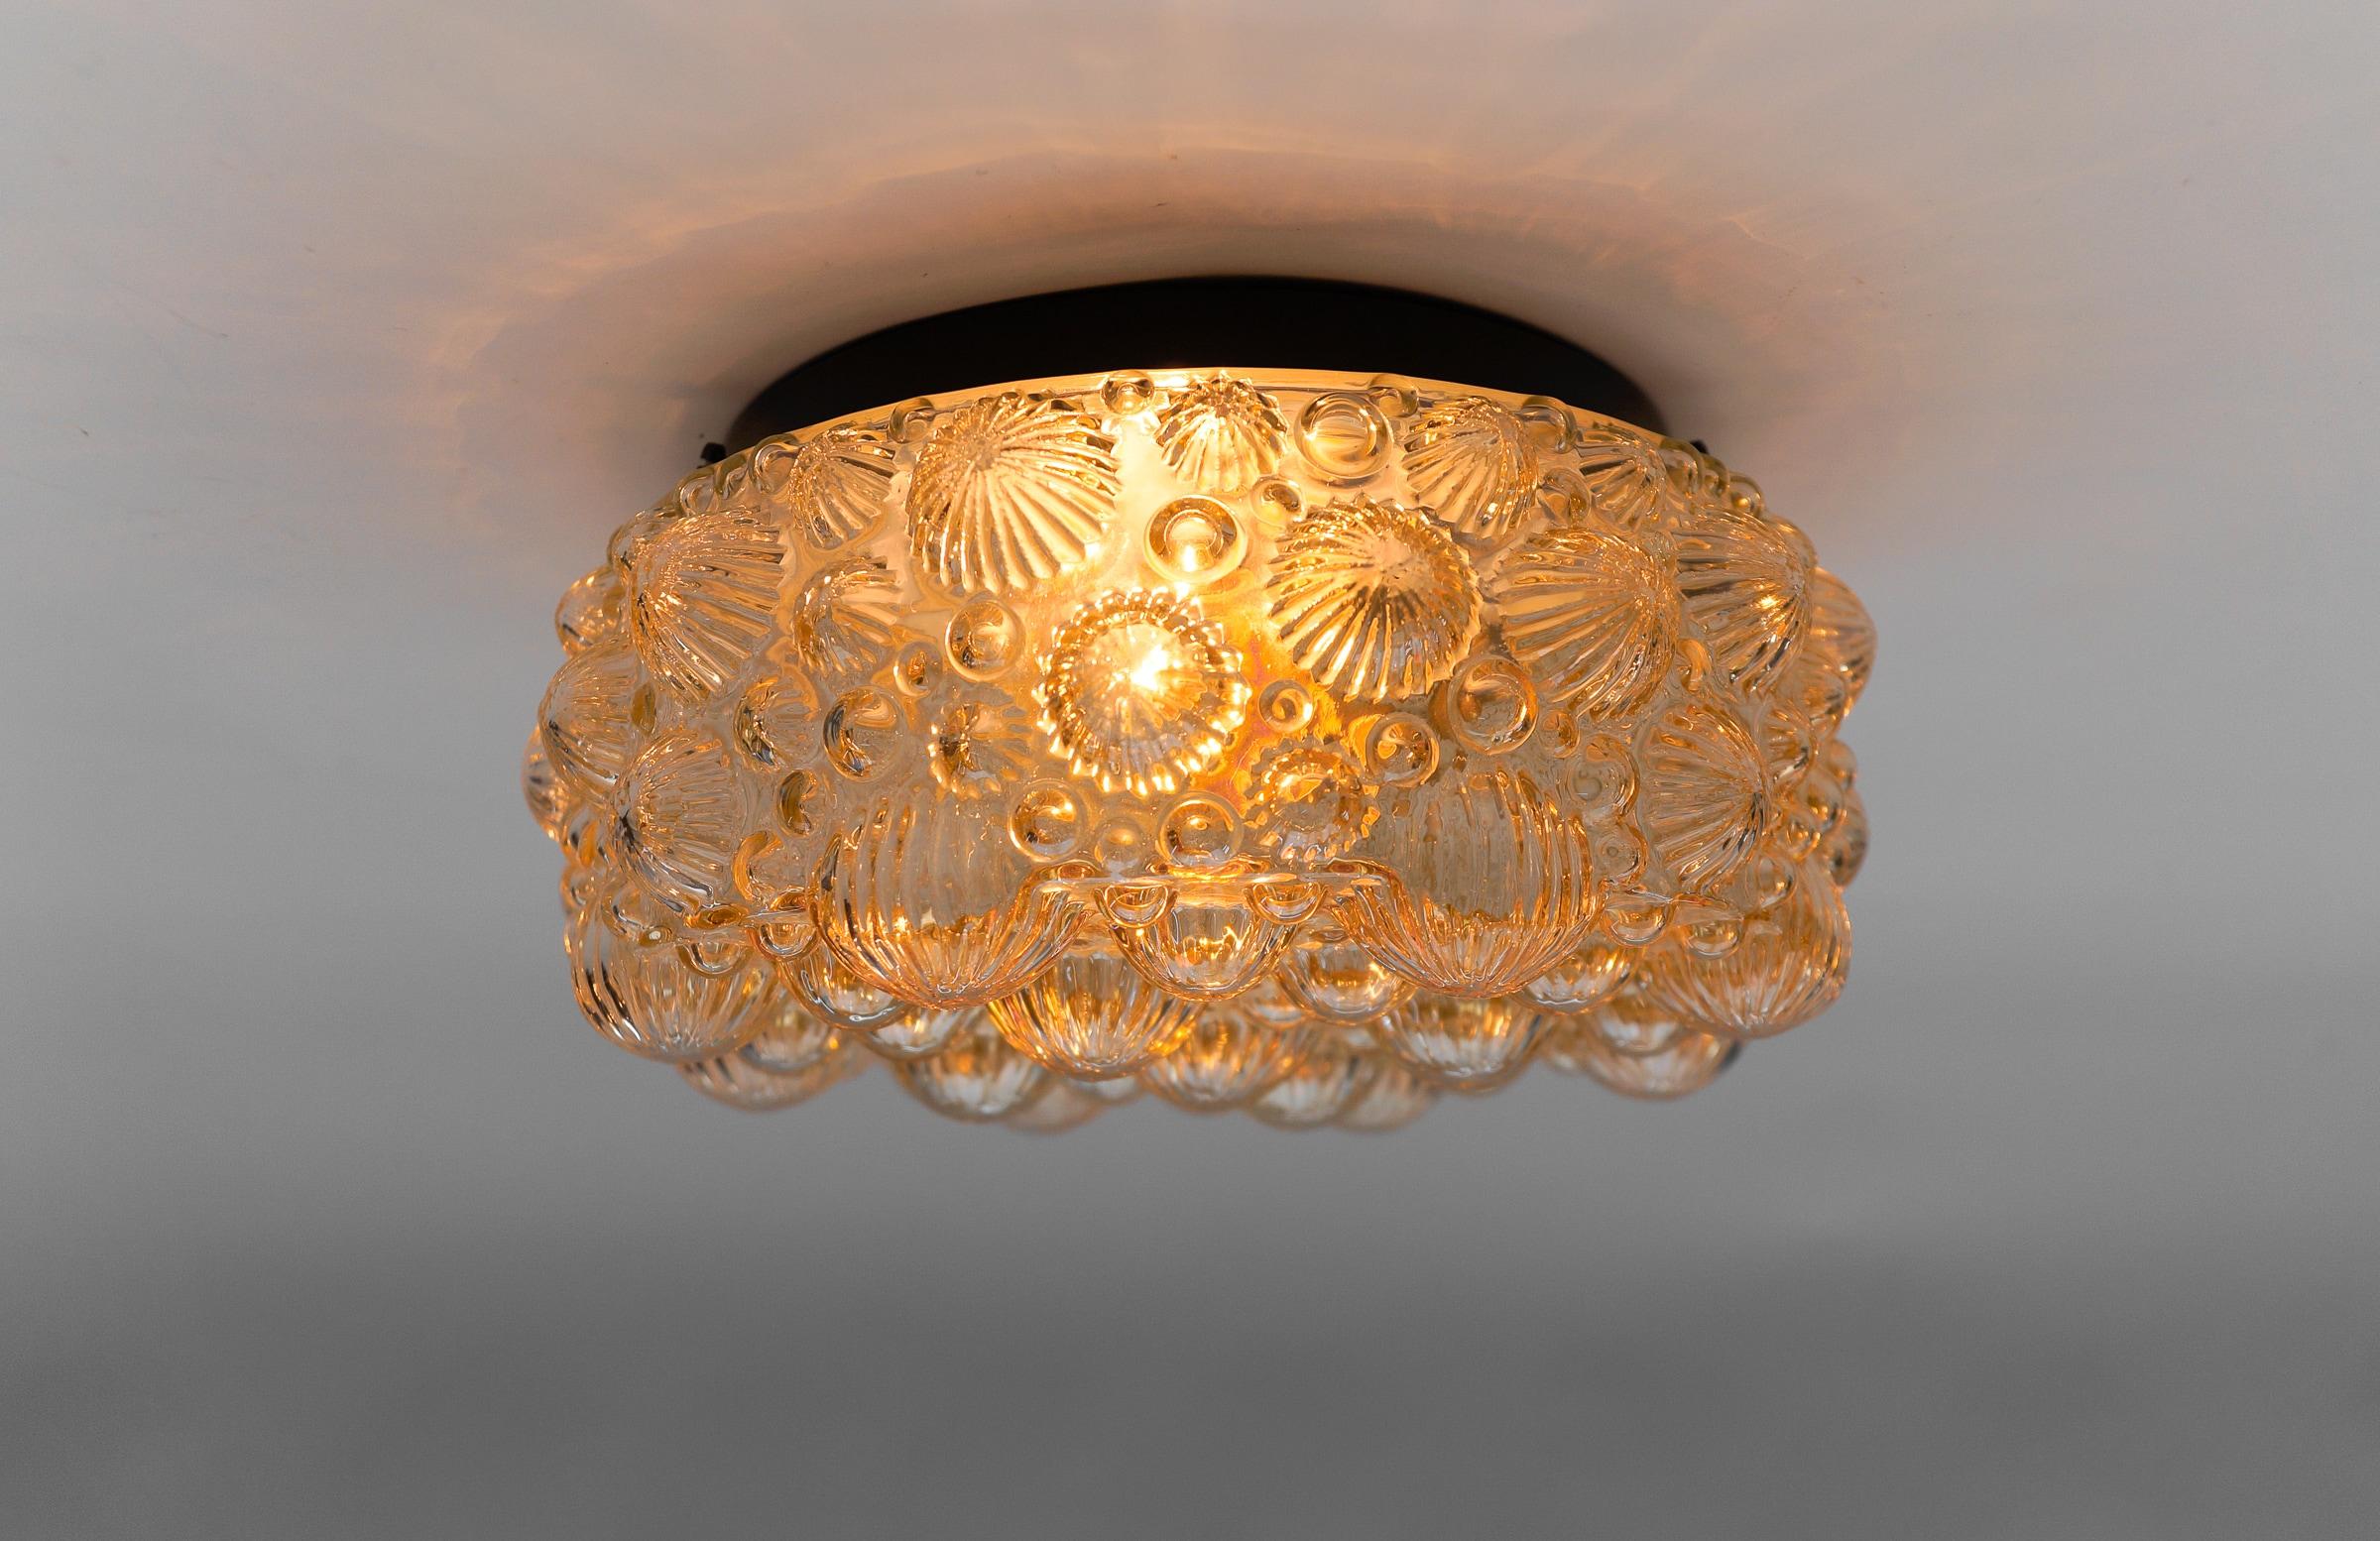 Round Amber Mid-Century Modern 3D Fossil Shell Shape Flush Mount Lamp, 1960s  
 
Executed in ice glass and metal. 

This lamp need 1 x E14 / E15 Edison screw fit bulb is wired, in working condition and runs both on 110 / 230 volt. Dimmable.

Our